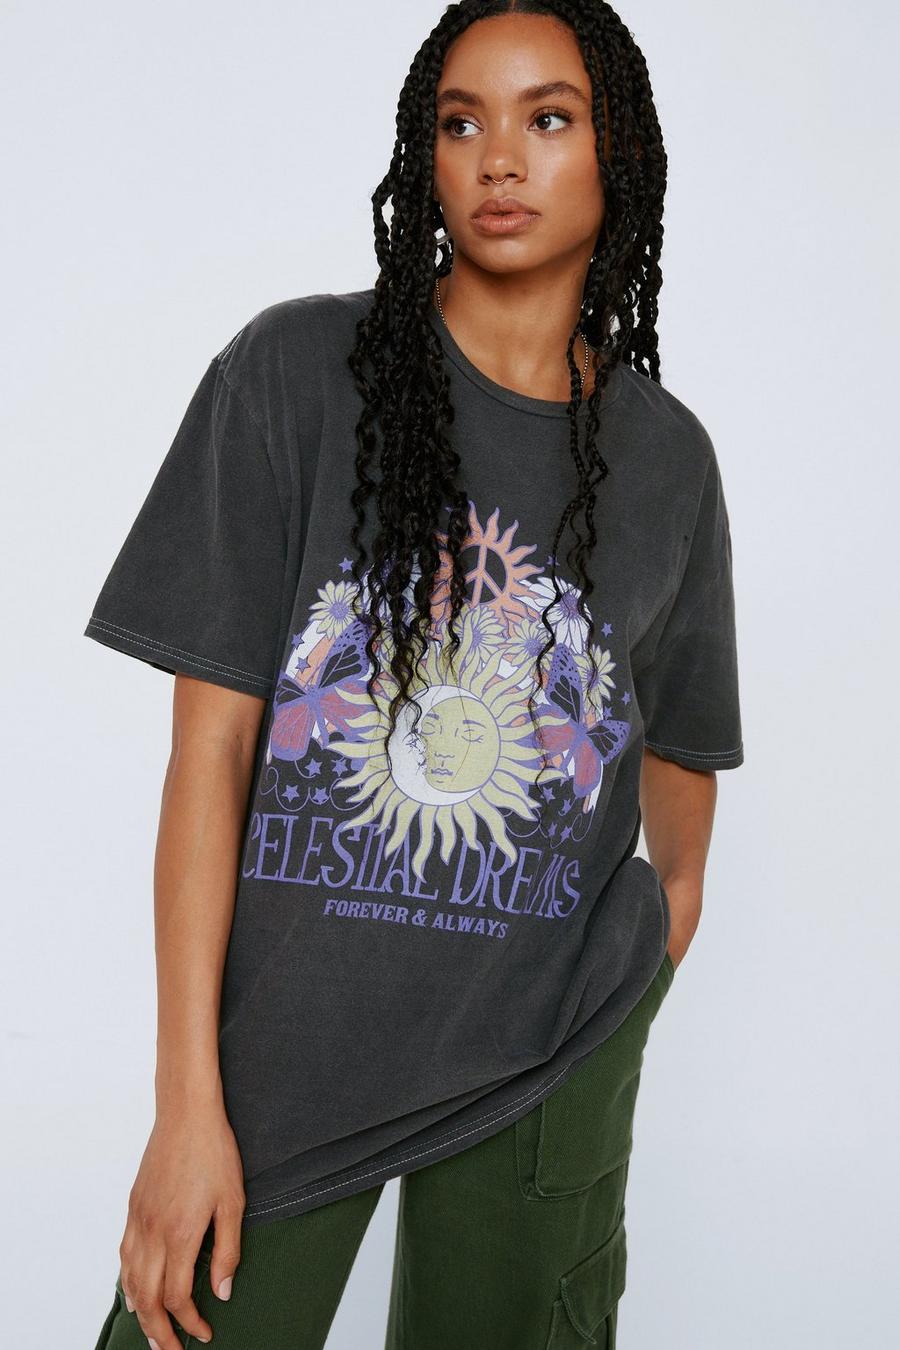 Oversized T-Shirts | Oversized Tops & Baggy T-Shirts | Nasty Gal